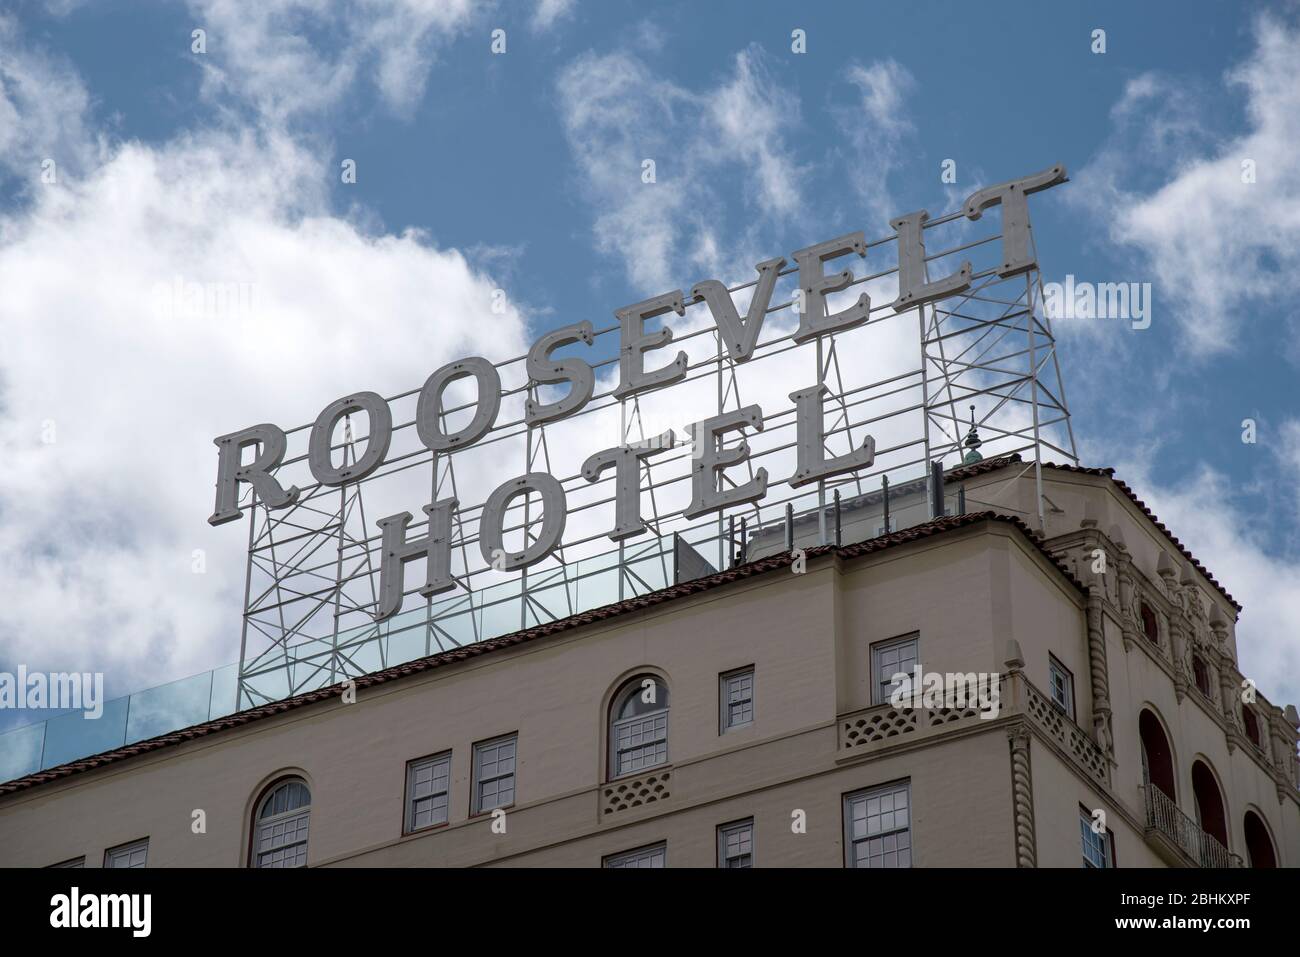 Hollywood, CA/USA - March 16, 2020: The famous Hollywood Roosevelt Hotel, where Marilyn Monroe once lived Stock Photo